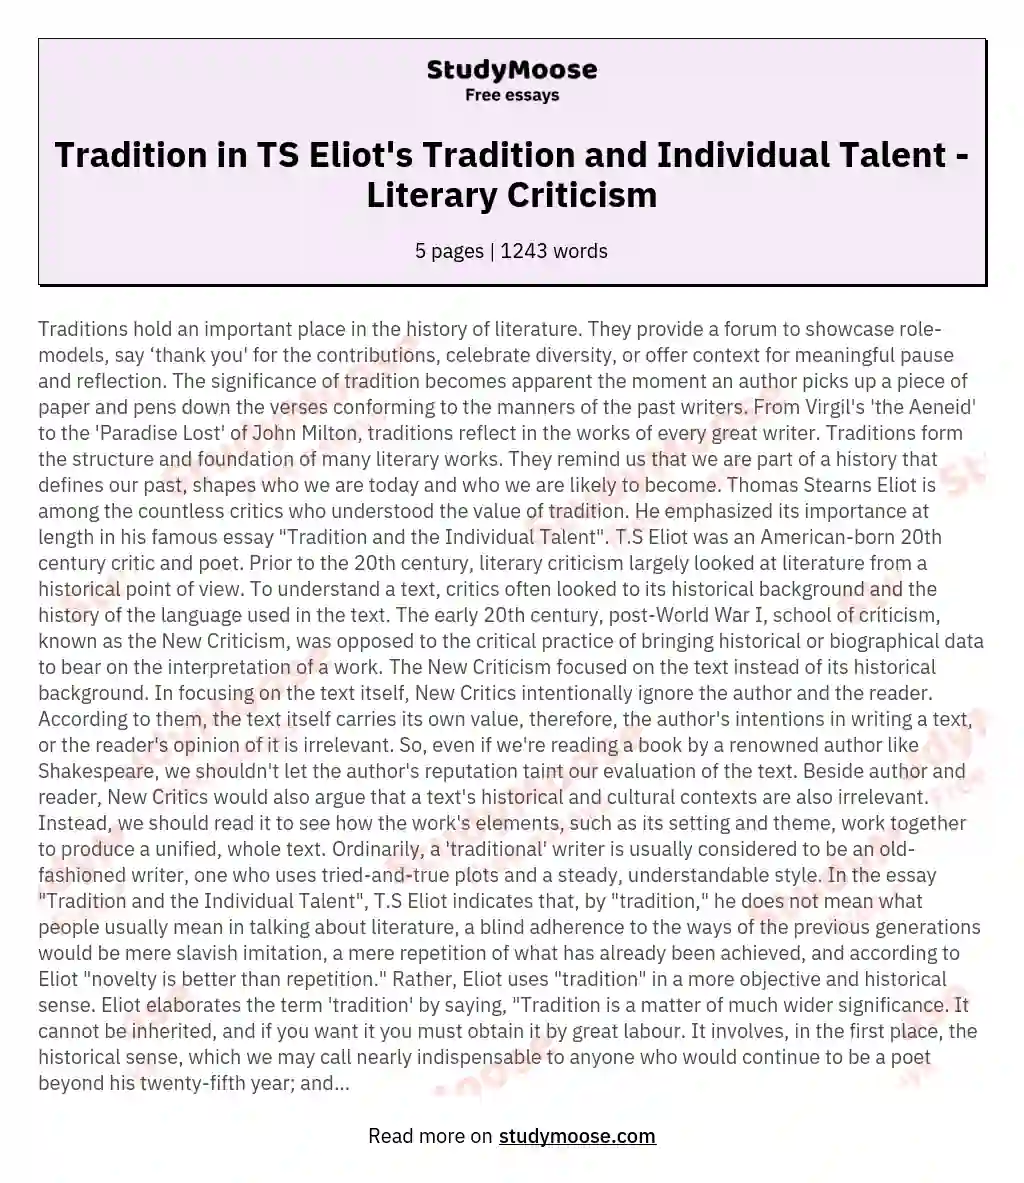 Tradition in TS Eliot's Tradition and Individual Talent - Literary Criticism essay